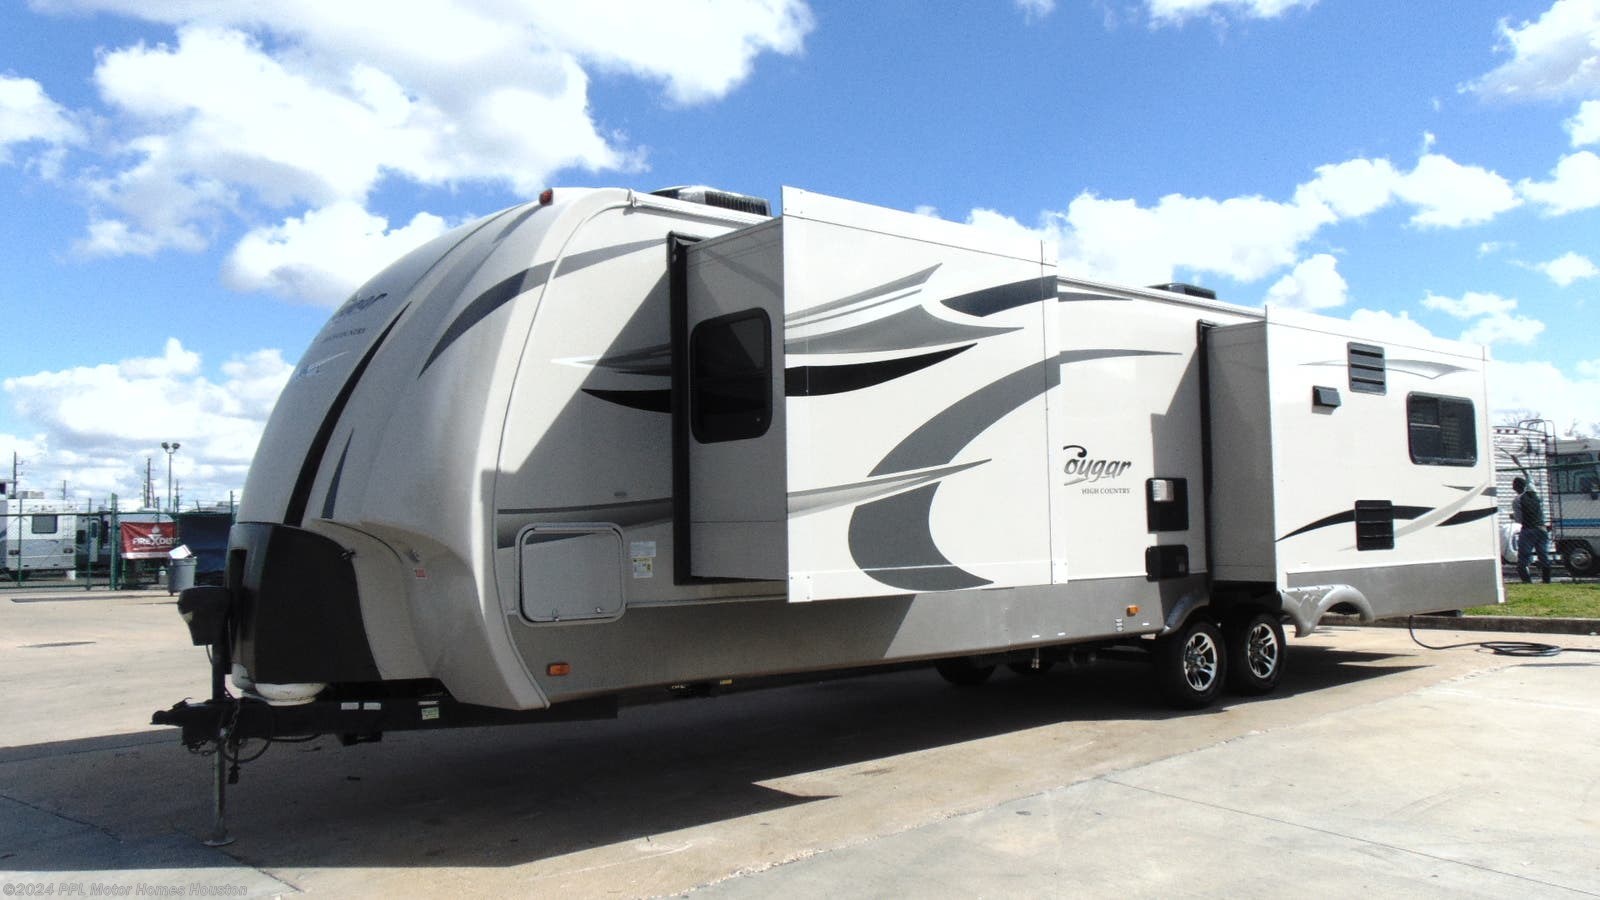 2012 Keystone Cougar High Country 321RES RV for Sale in Houston, TX 2012 Keystone Cougar High Country 321res